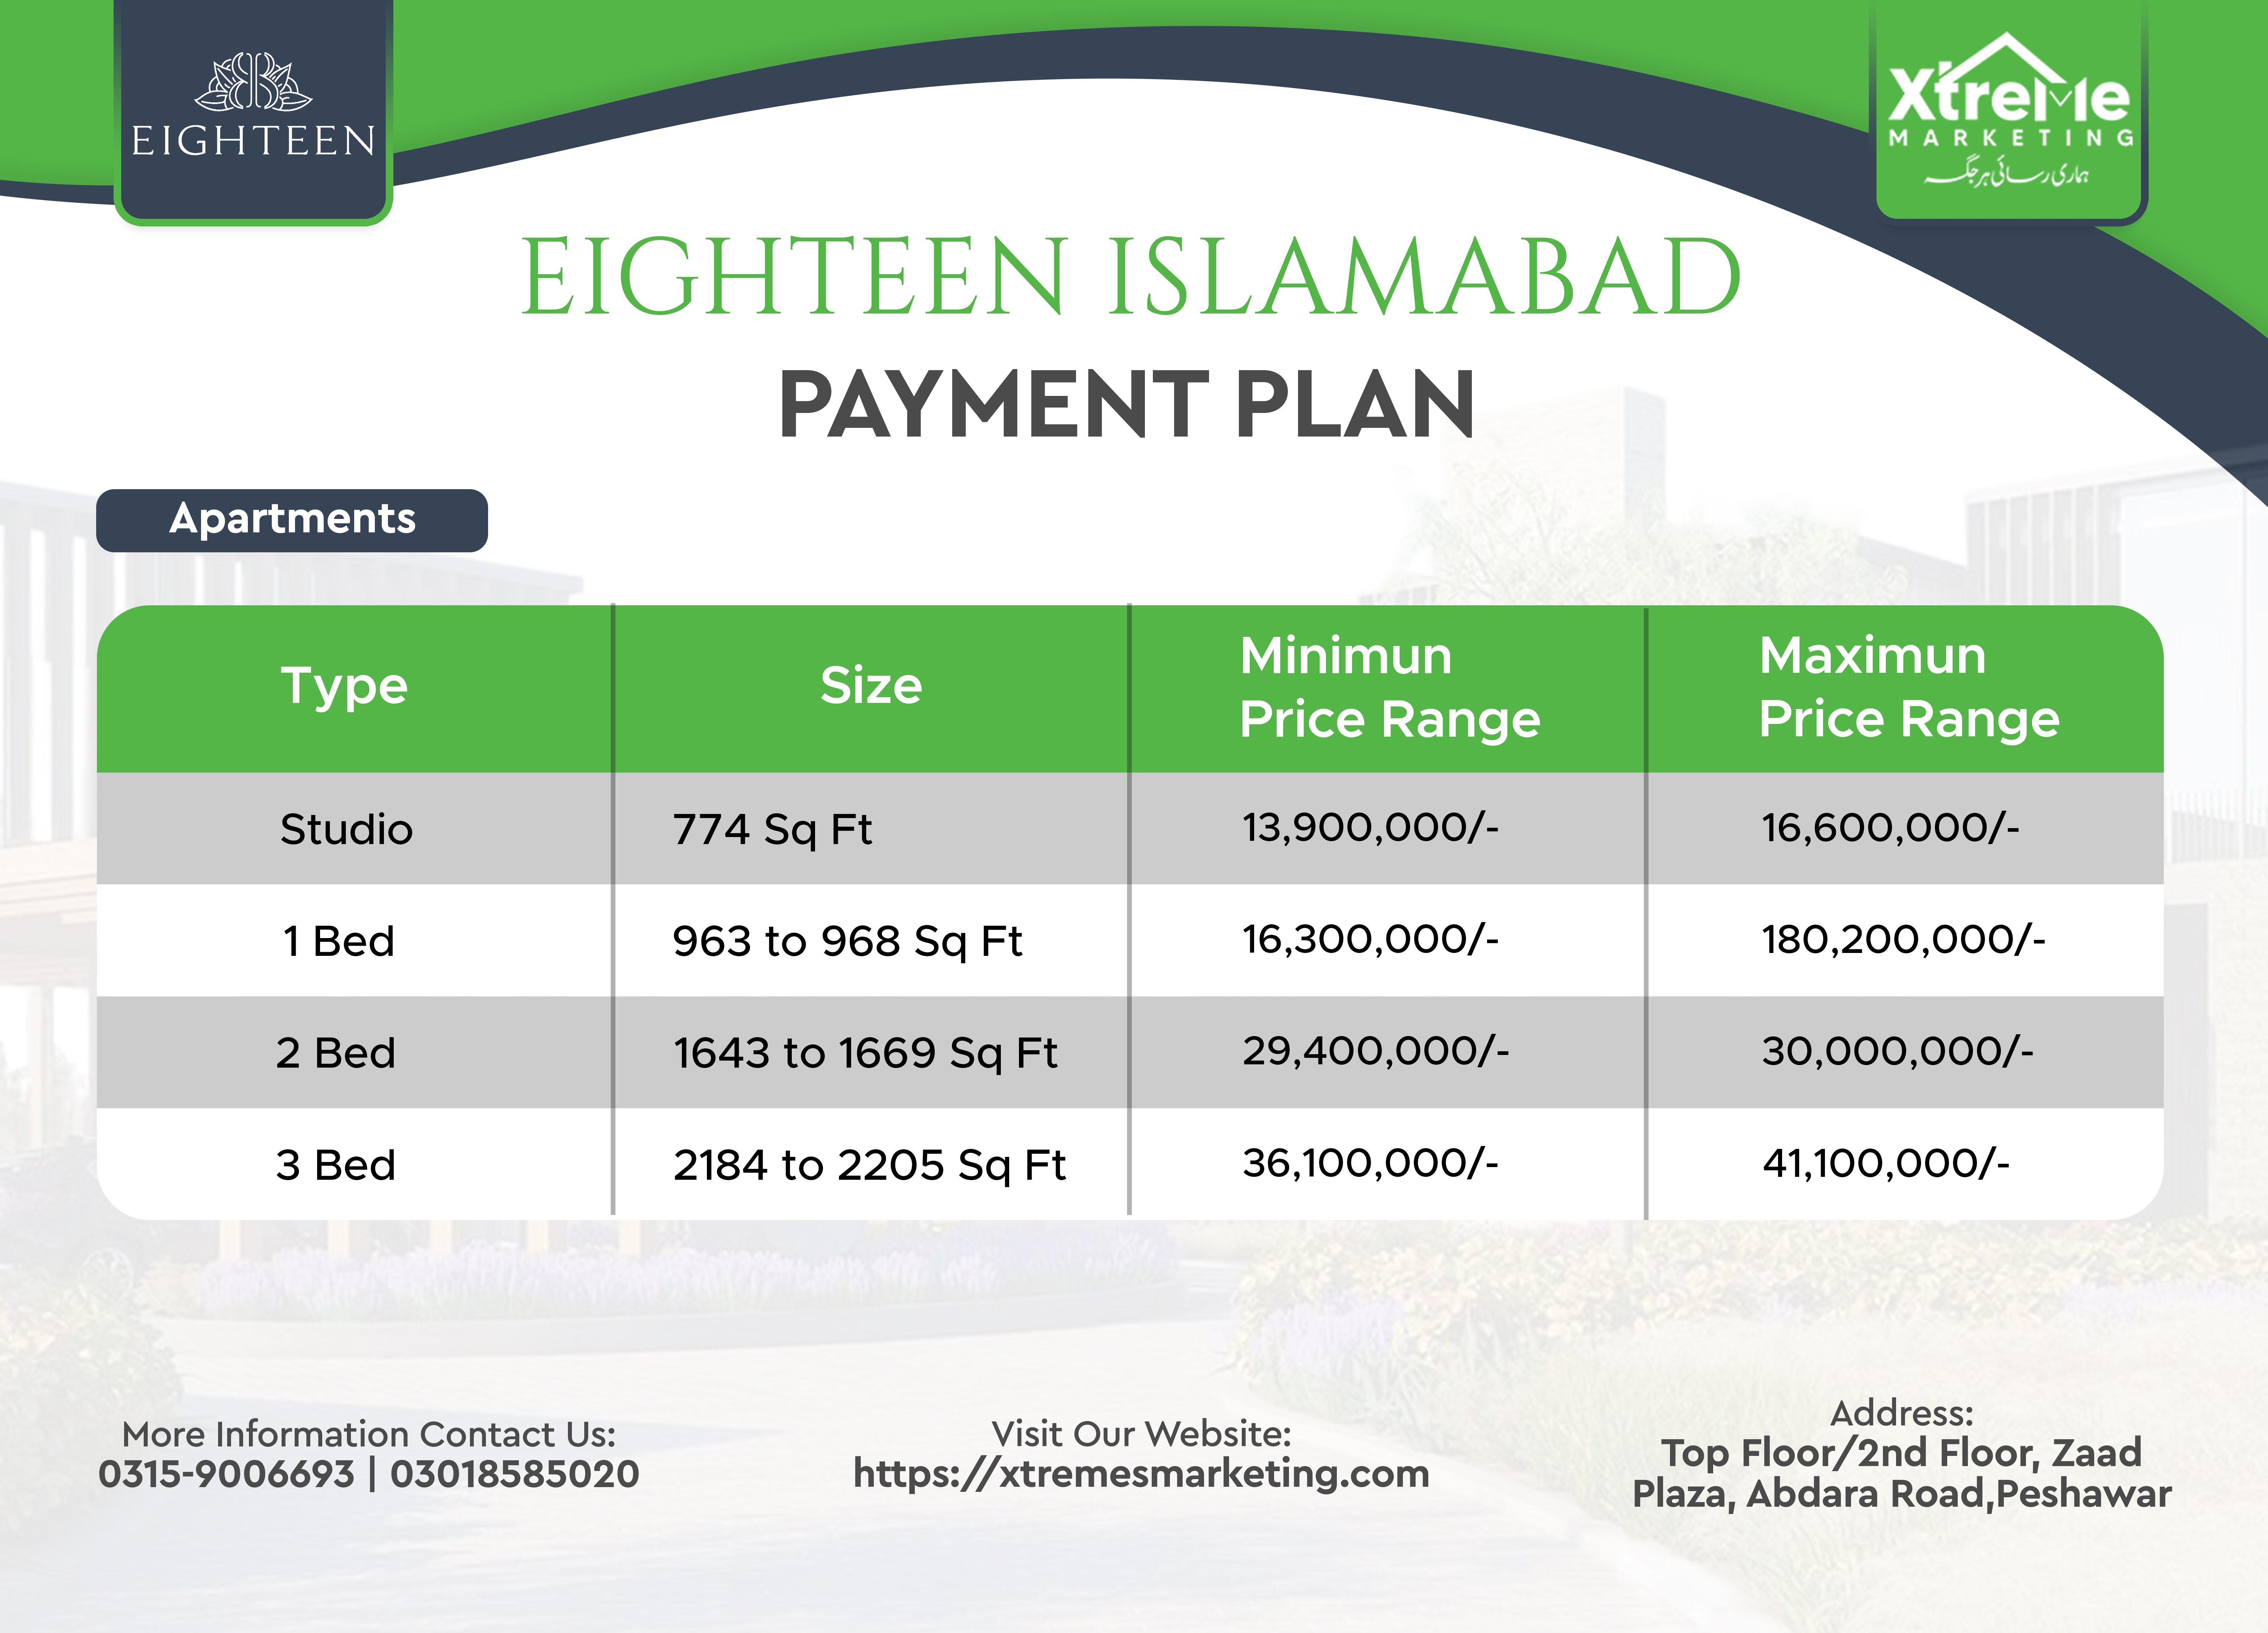 EIGHTEEN ISLAMABAD APARTMENTS PAYMENT PLAN